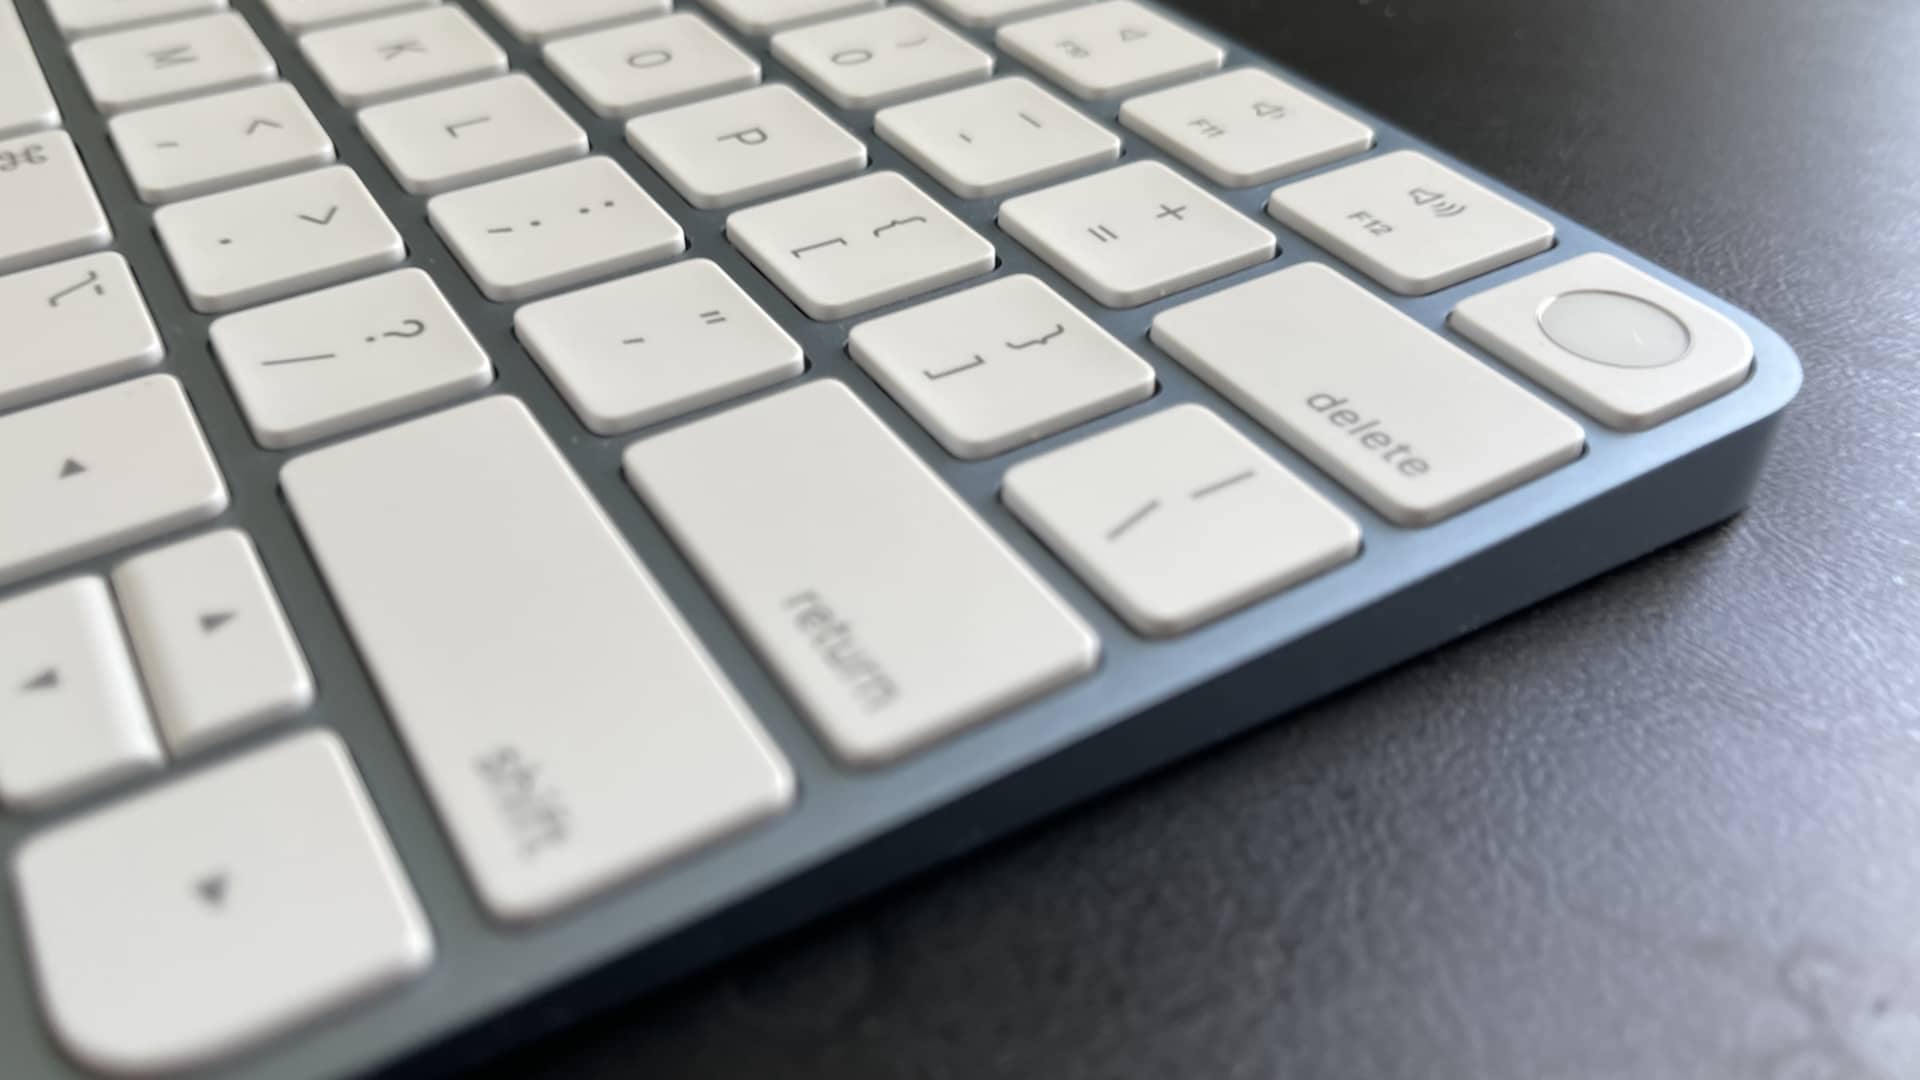 Apple iMac M1 2021 Magic Keyboard with Touch ID.